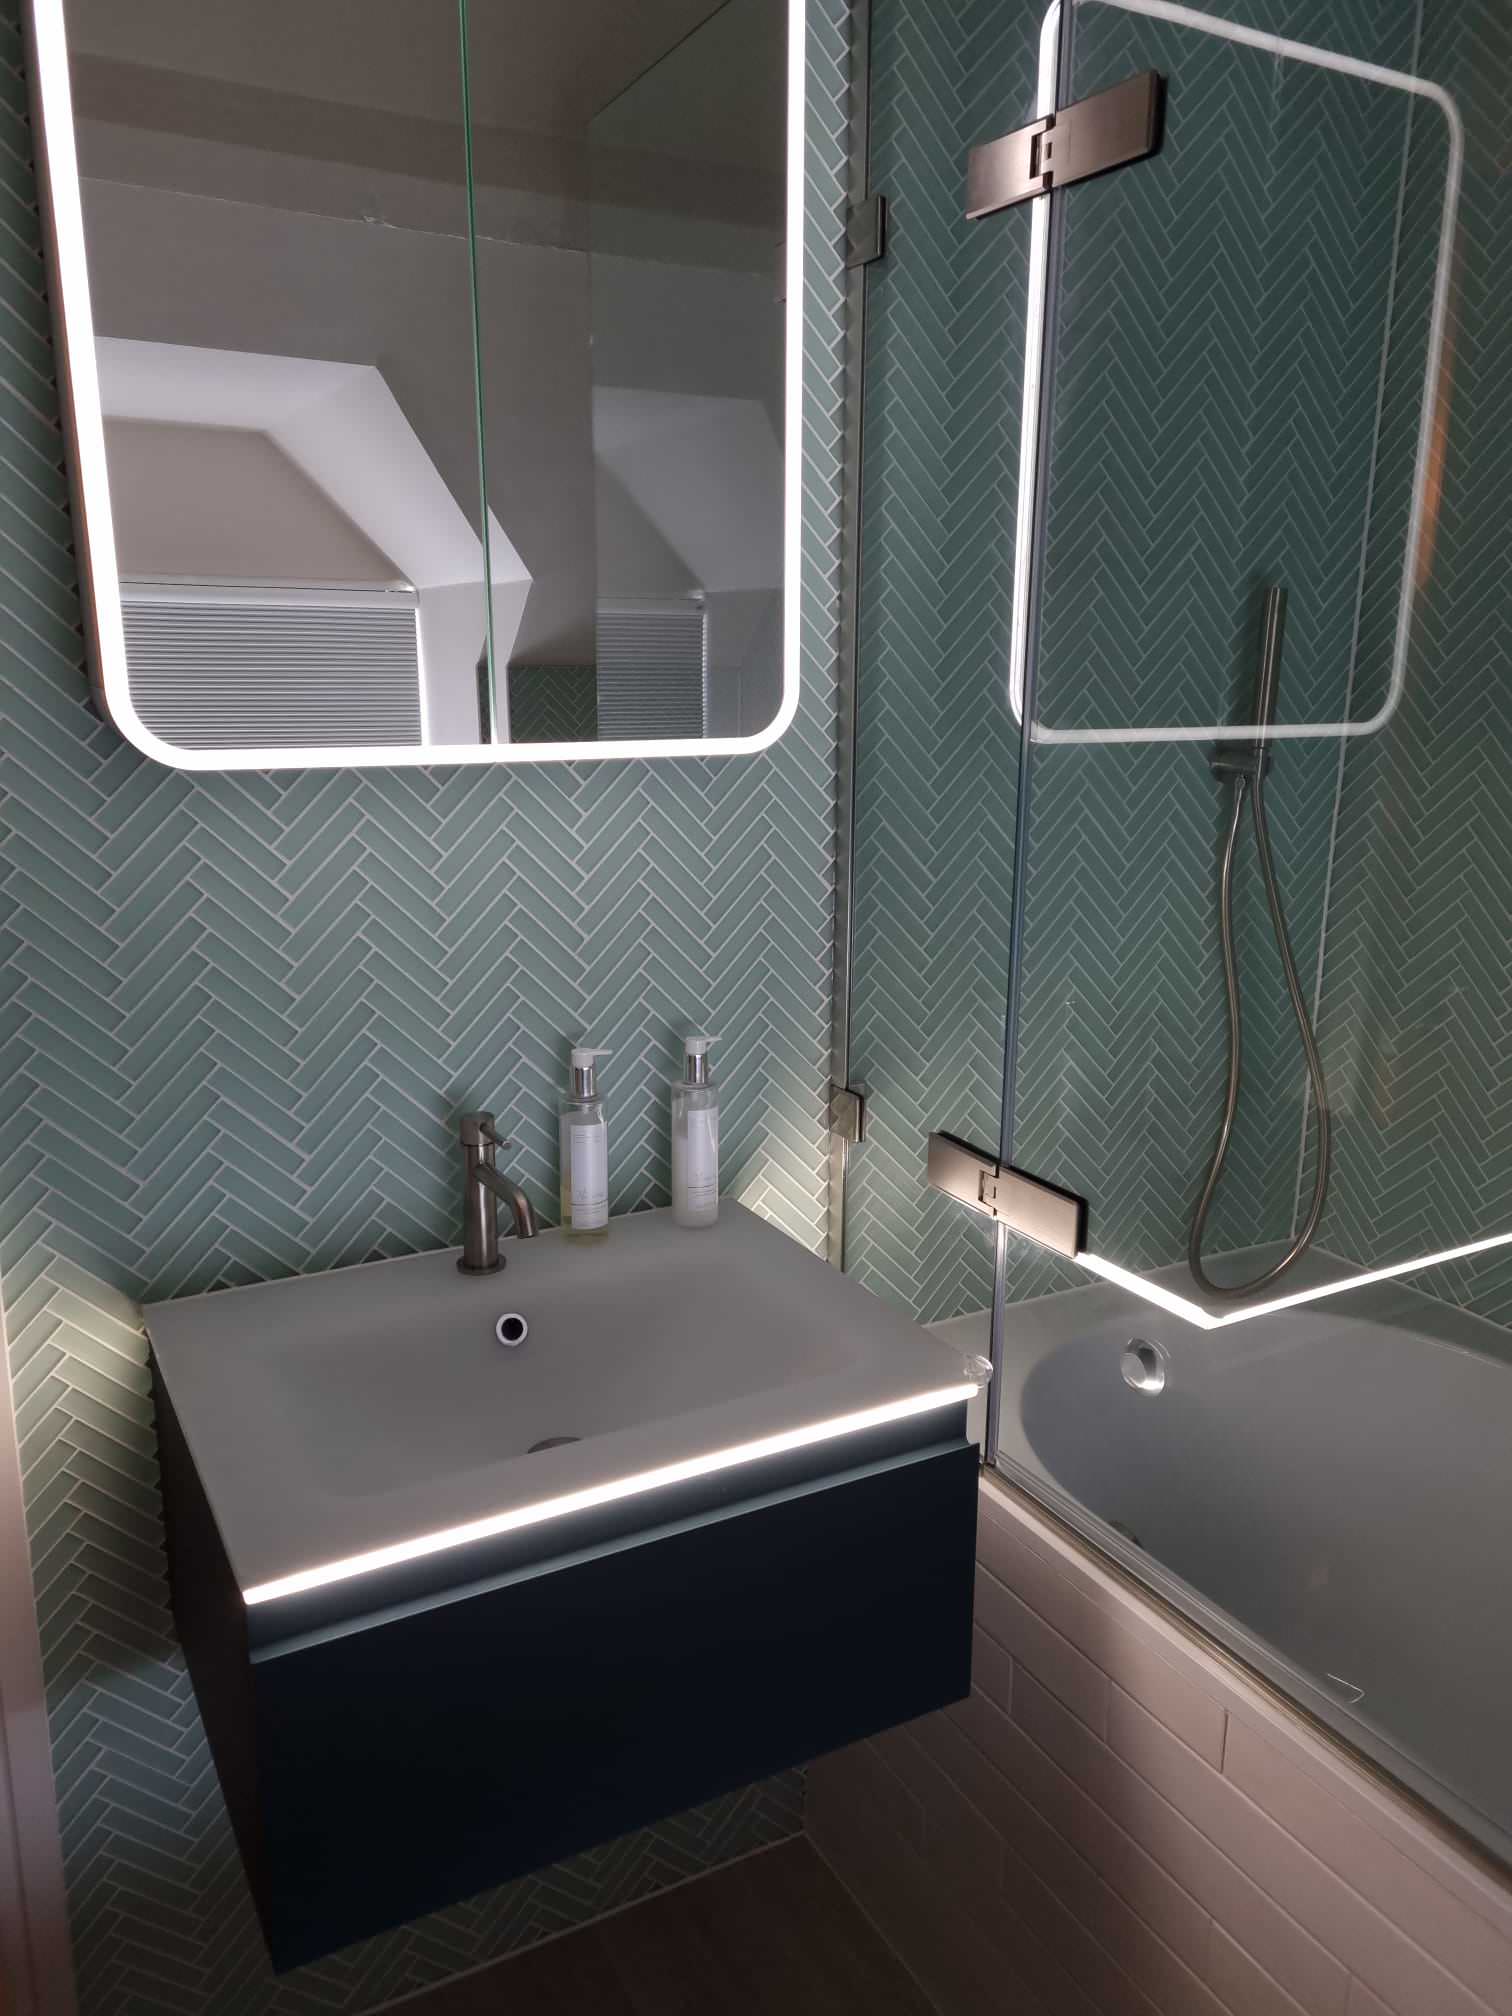 75 Bathroom with Green Cabinets and Glass Countertops Ideas You'll Love -  September, 2022 | Houzz